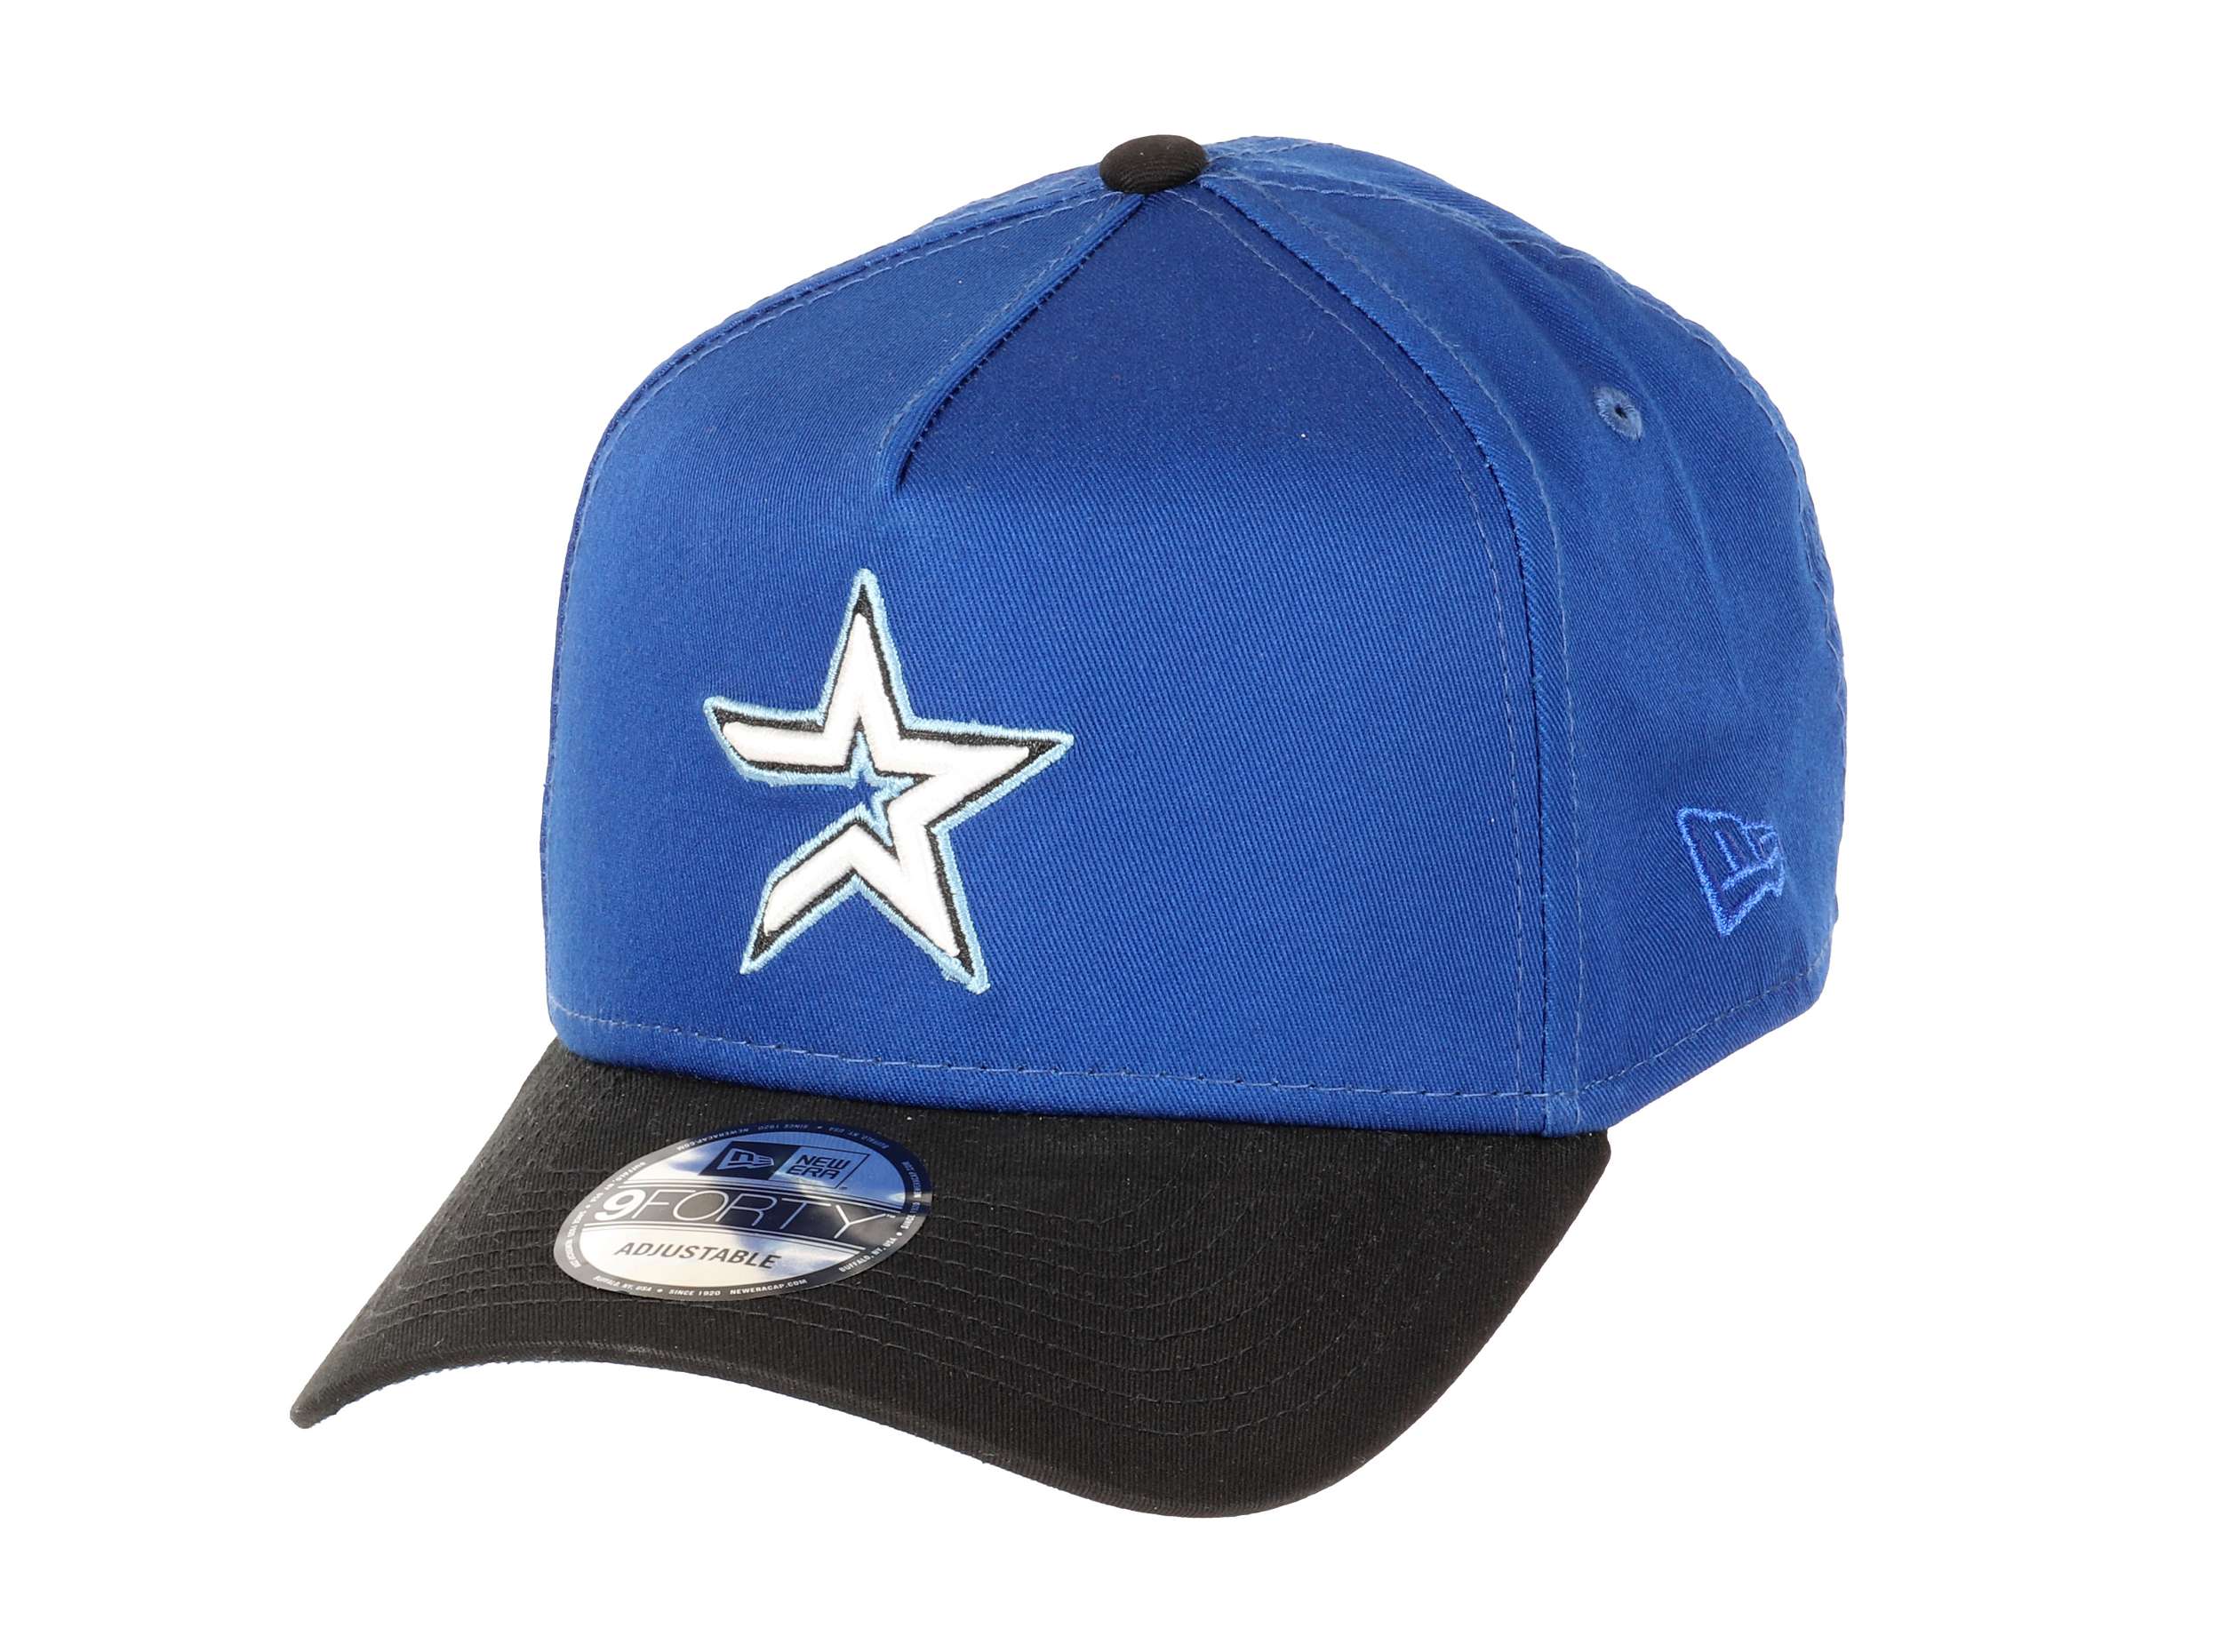 Houston Astros MLB 45th Anniversary Sidepatch Cooperstown Royal Blue Sky 9Forty A-Frame Snapback Cap New Era